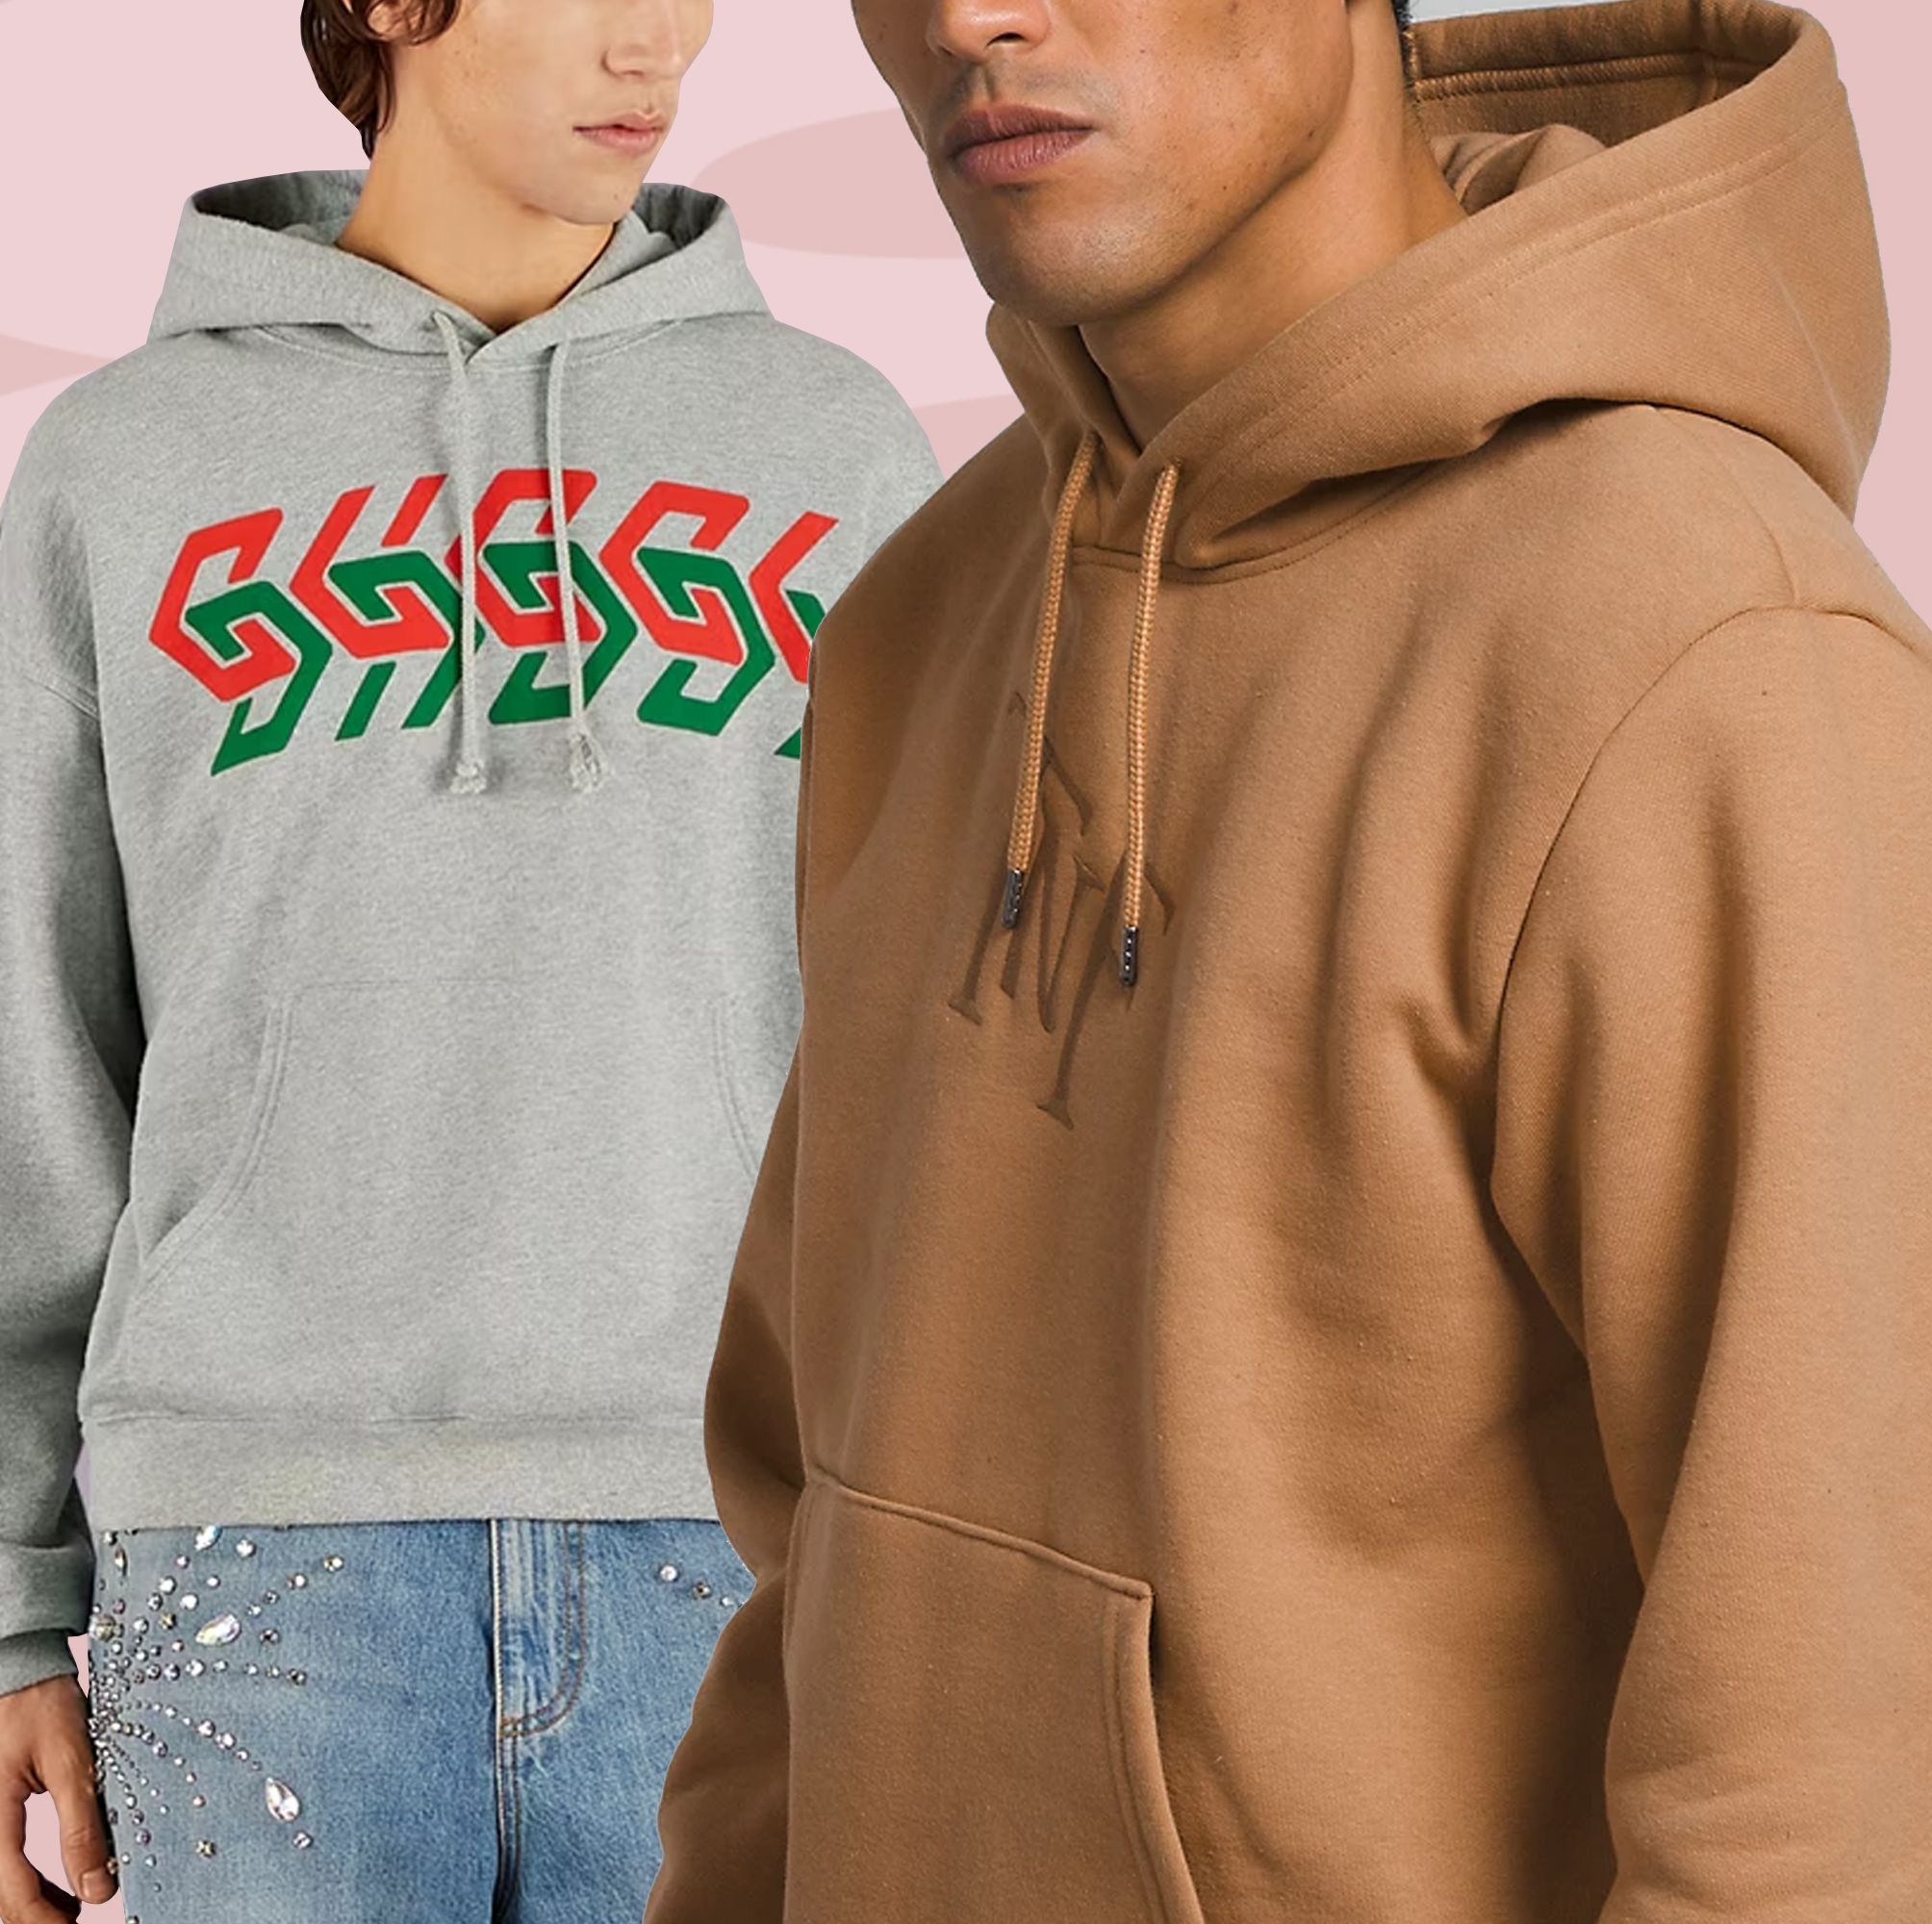 We're in the Golden Age of Hoodies. Make Sure Yours Rises to the Occasion.